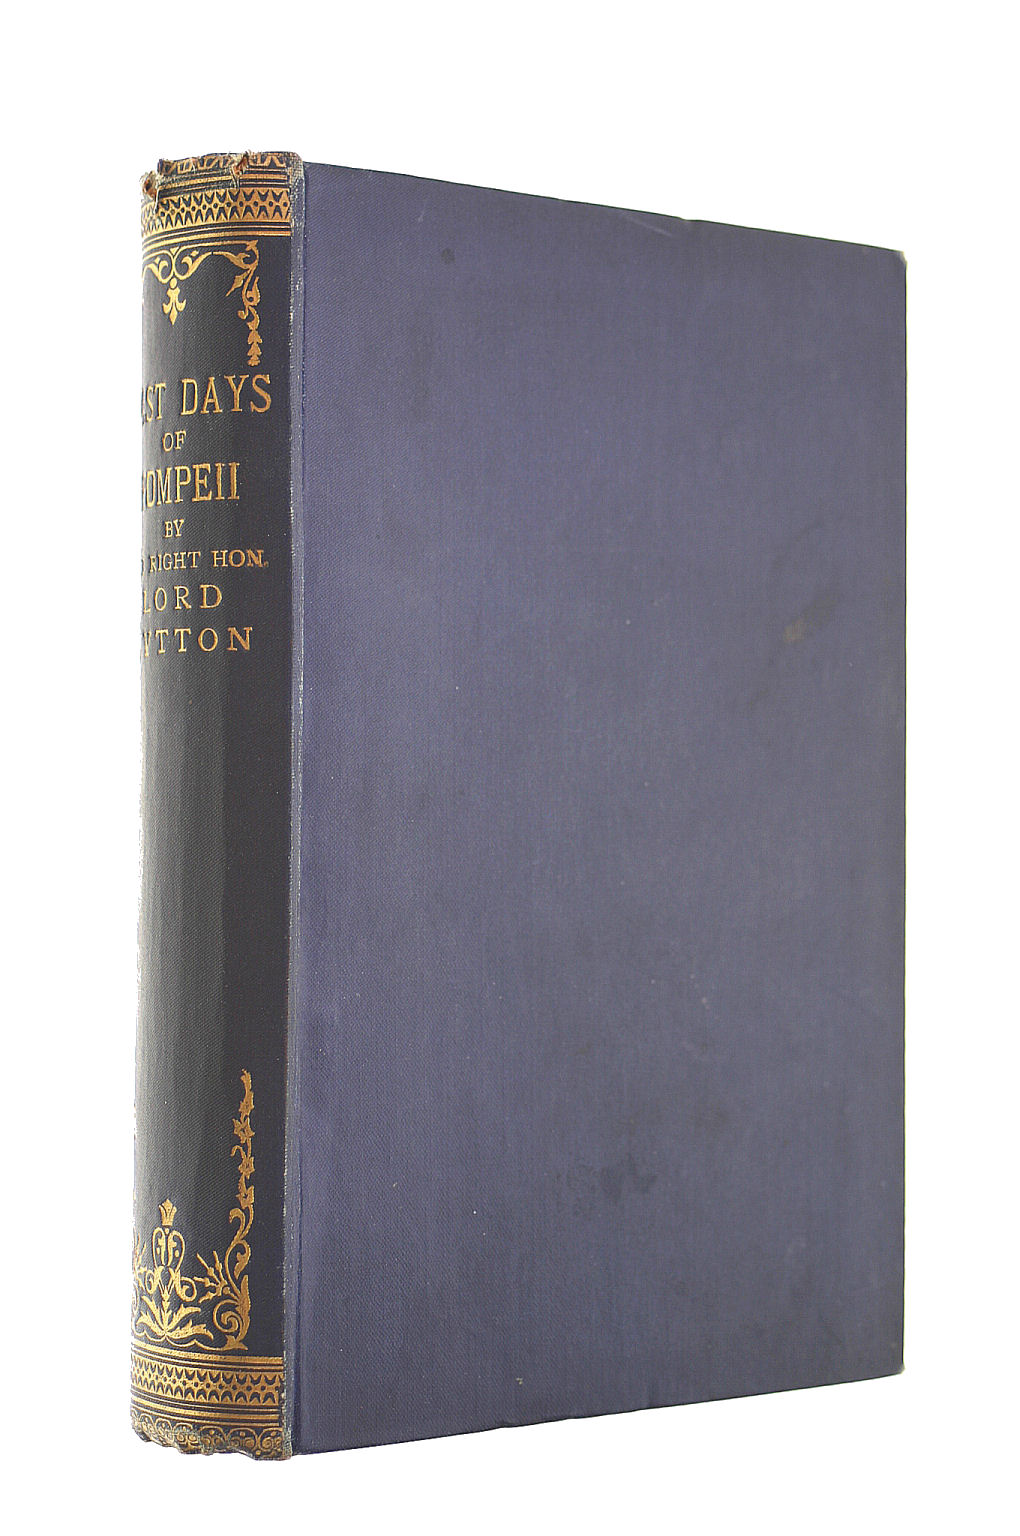 LYTTON - THE LAST DAYS OF POMPEII BY THE RIGHT HON. LORD LYTTON 1ST EDITION, 2ND IMPRESSION